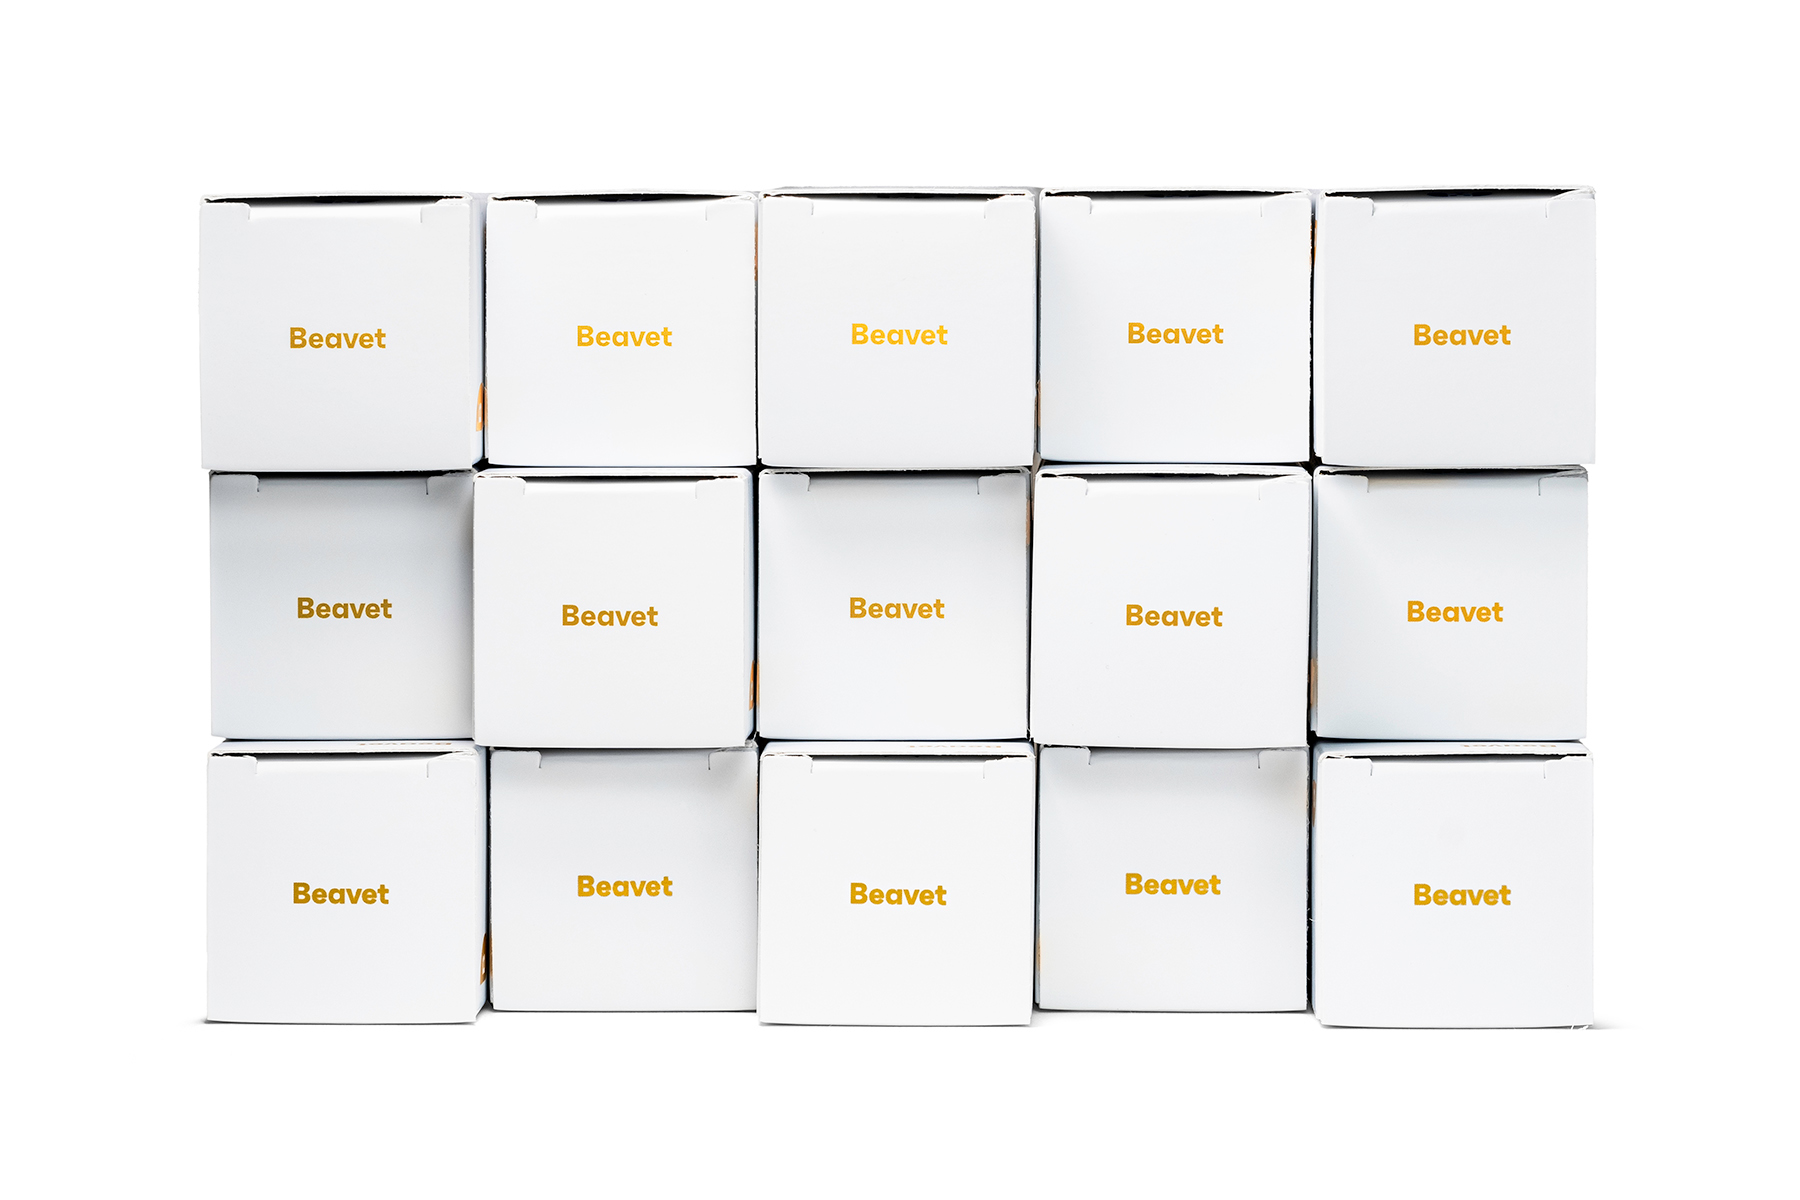 Photograph of several beavet boxes lined up and showing the tops.